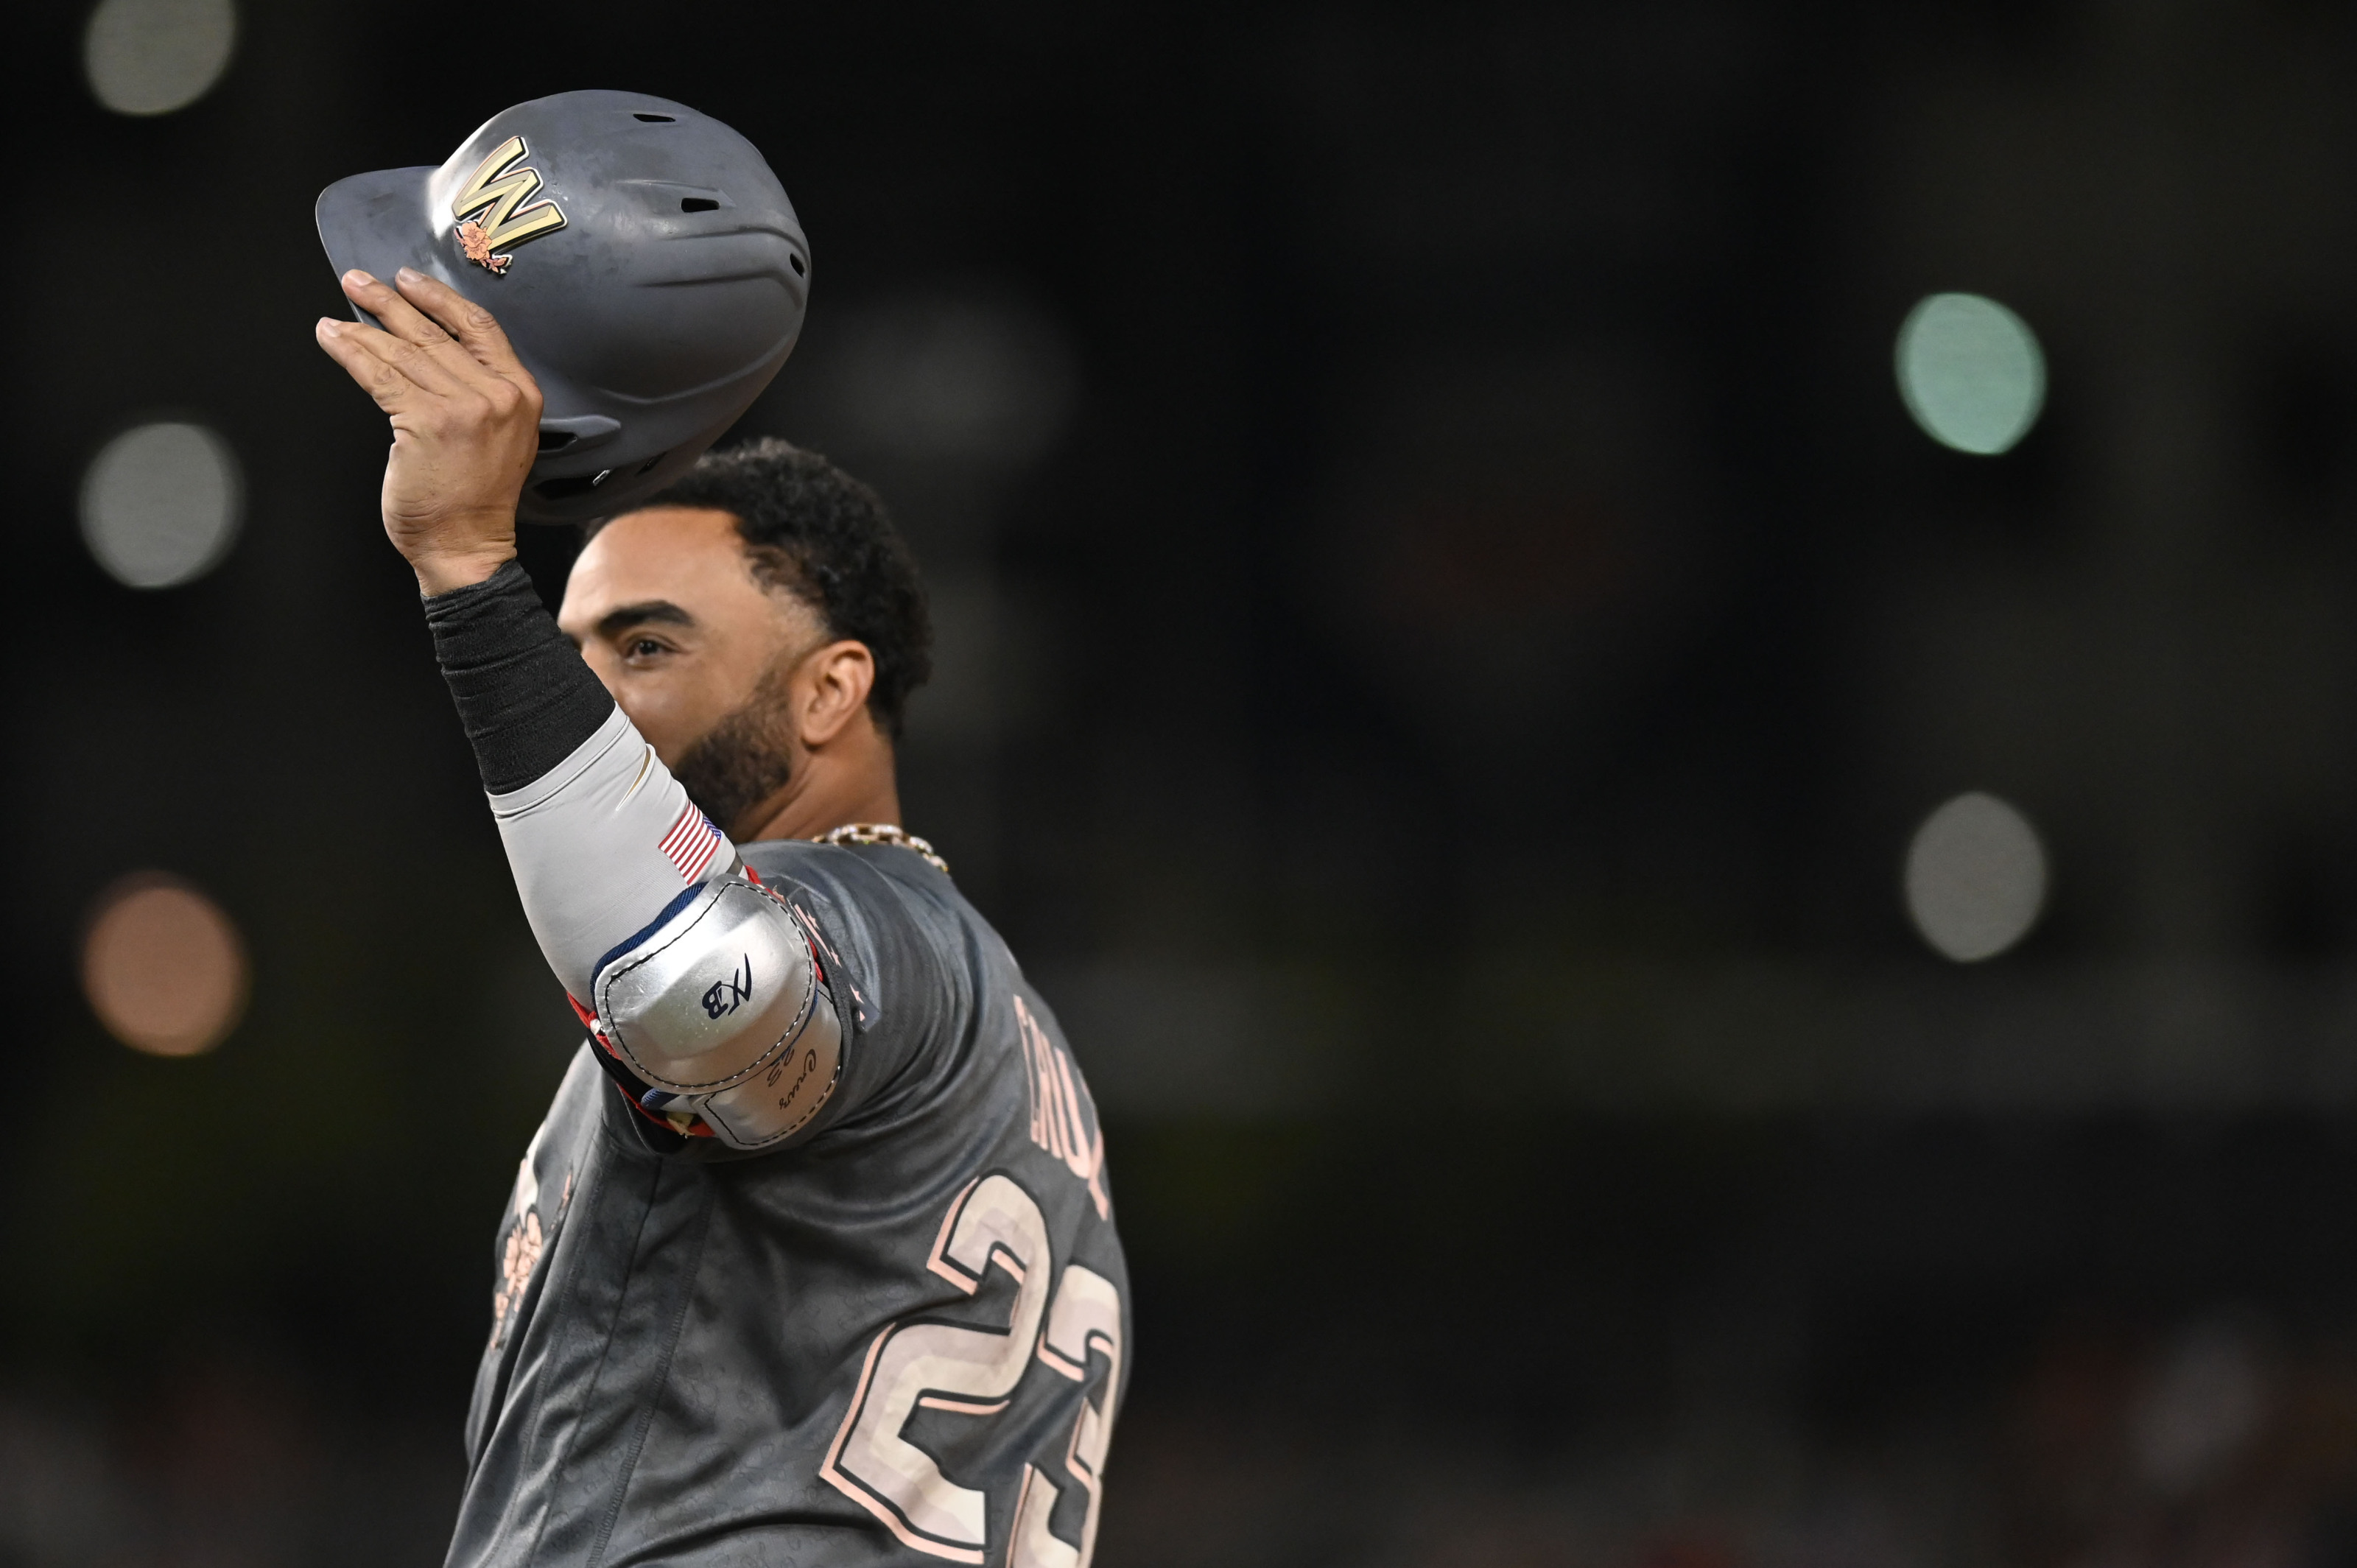 Nelson Cruz expected to return Tuesday for the Padres - Gaslamp Ball